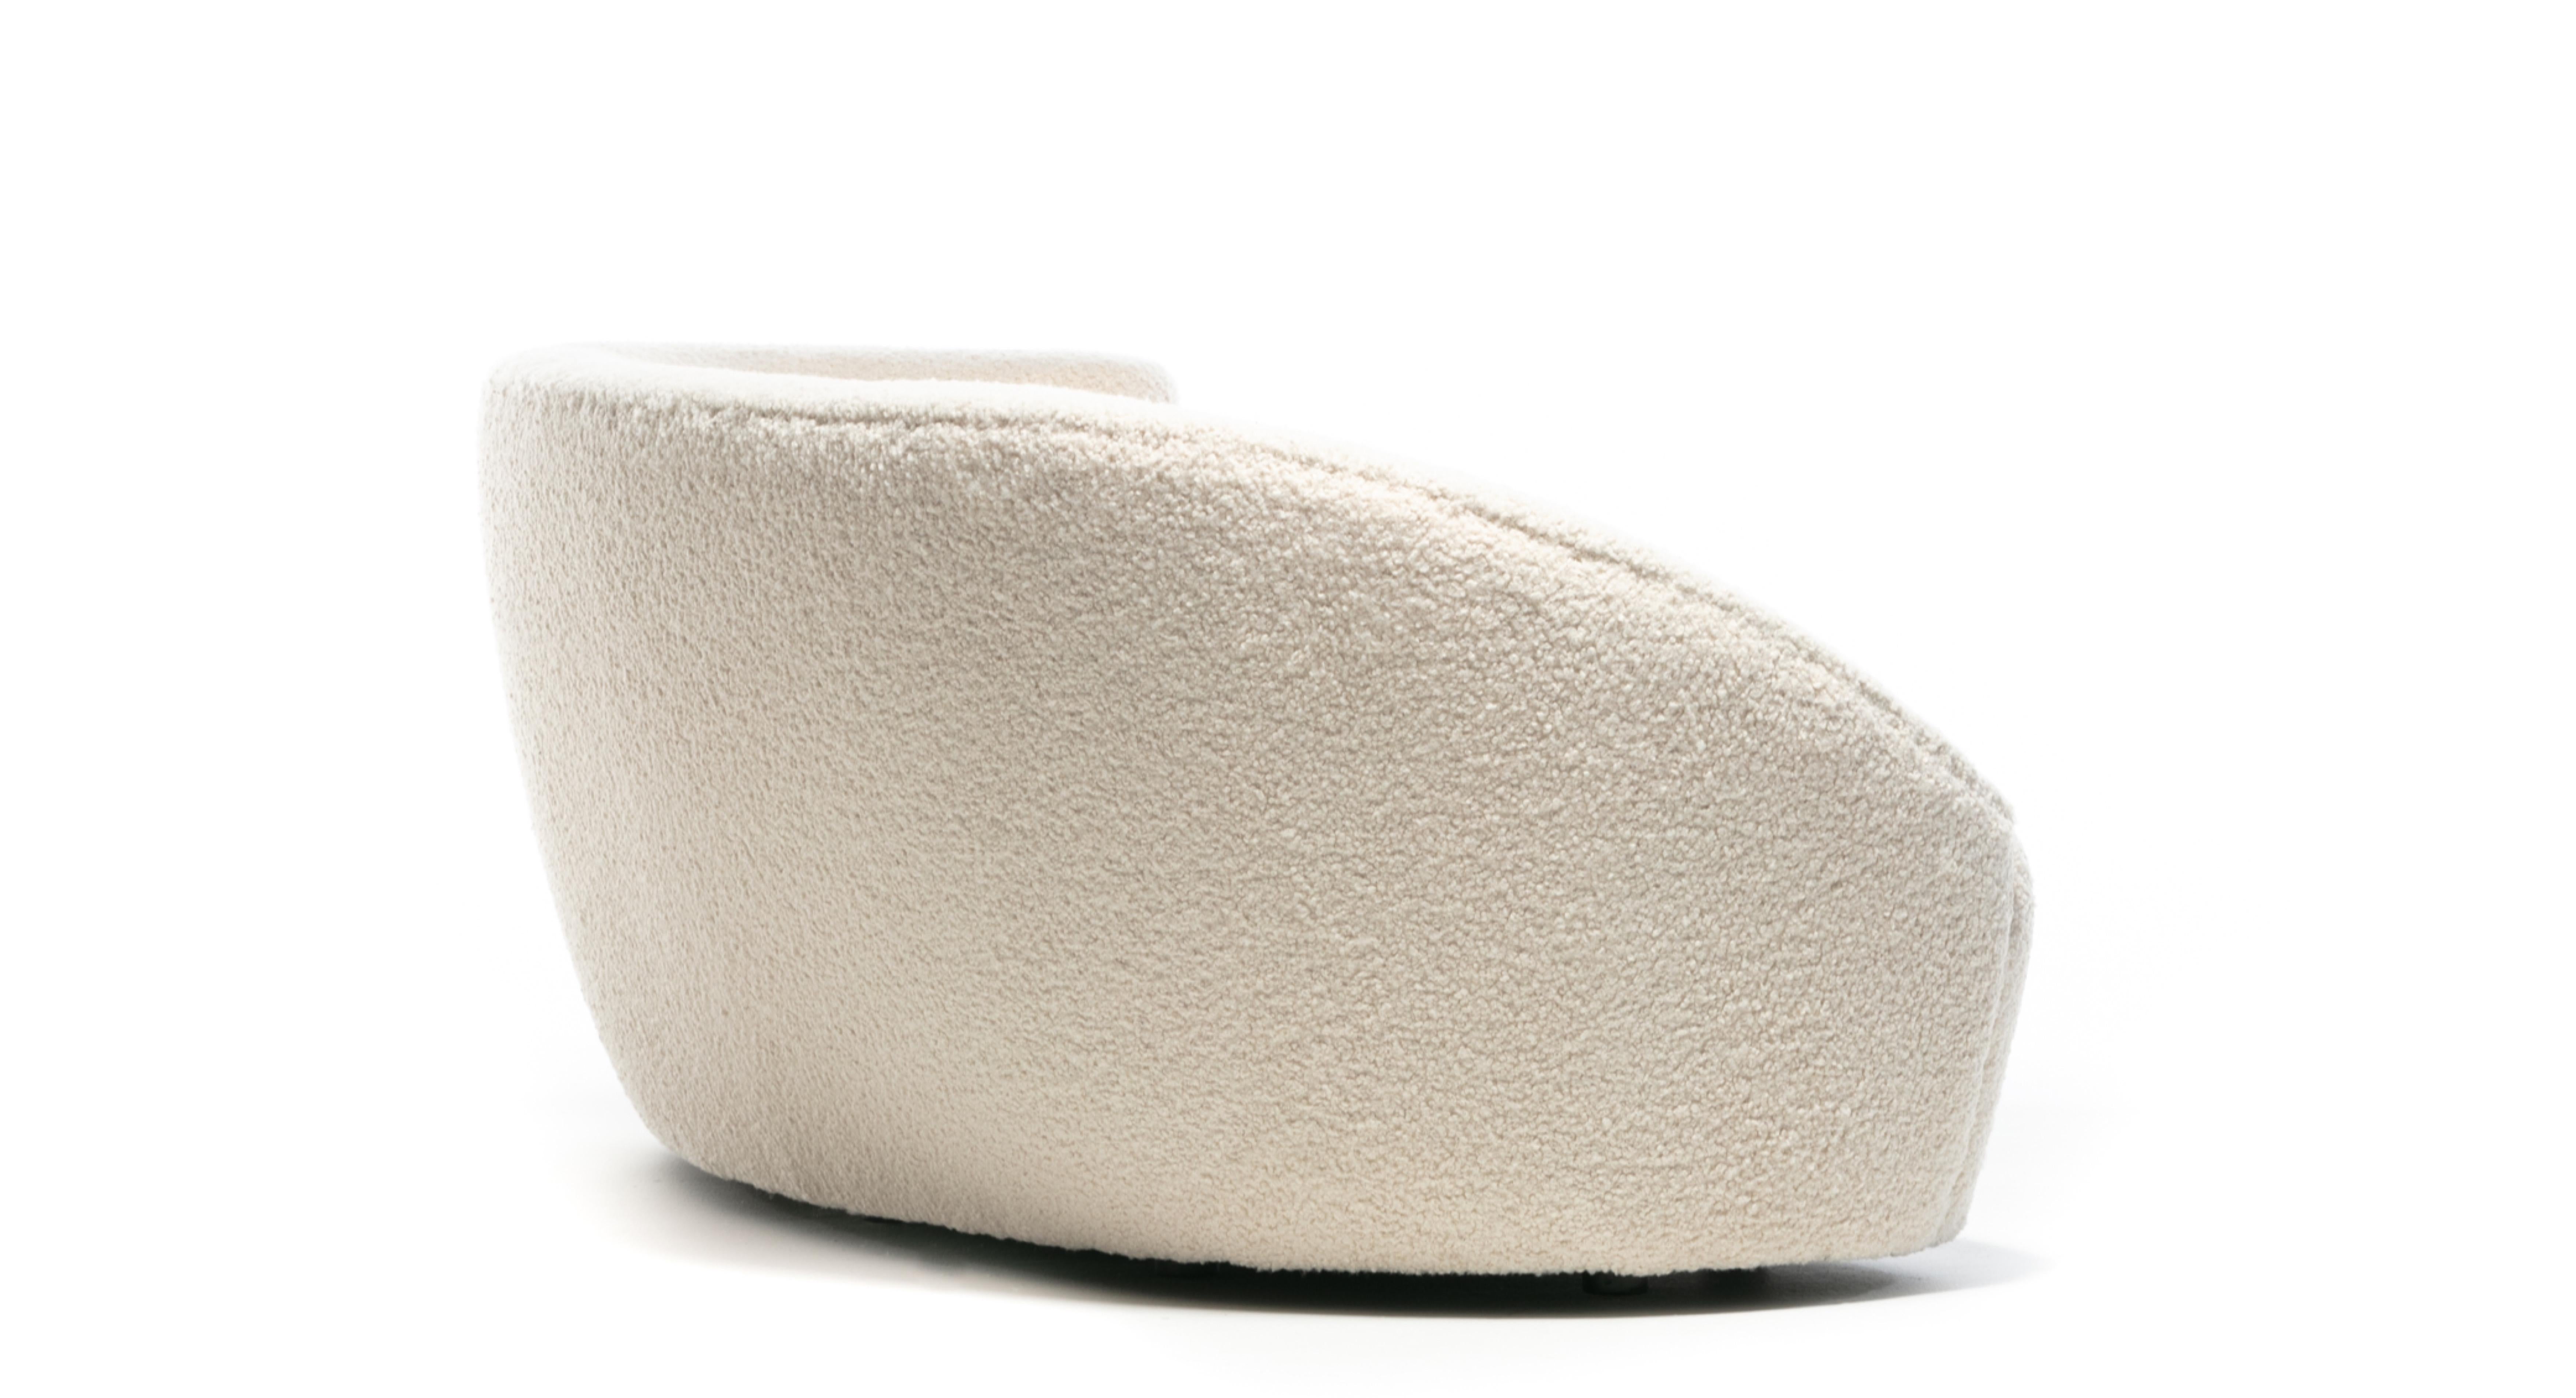 Vladimir Kagan Nautilus Sofa in Ivory White Bouclé by Directional, c. 1990 For Sale 2